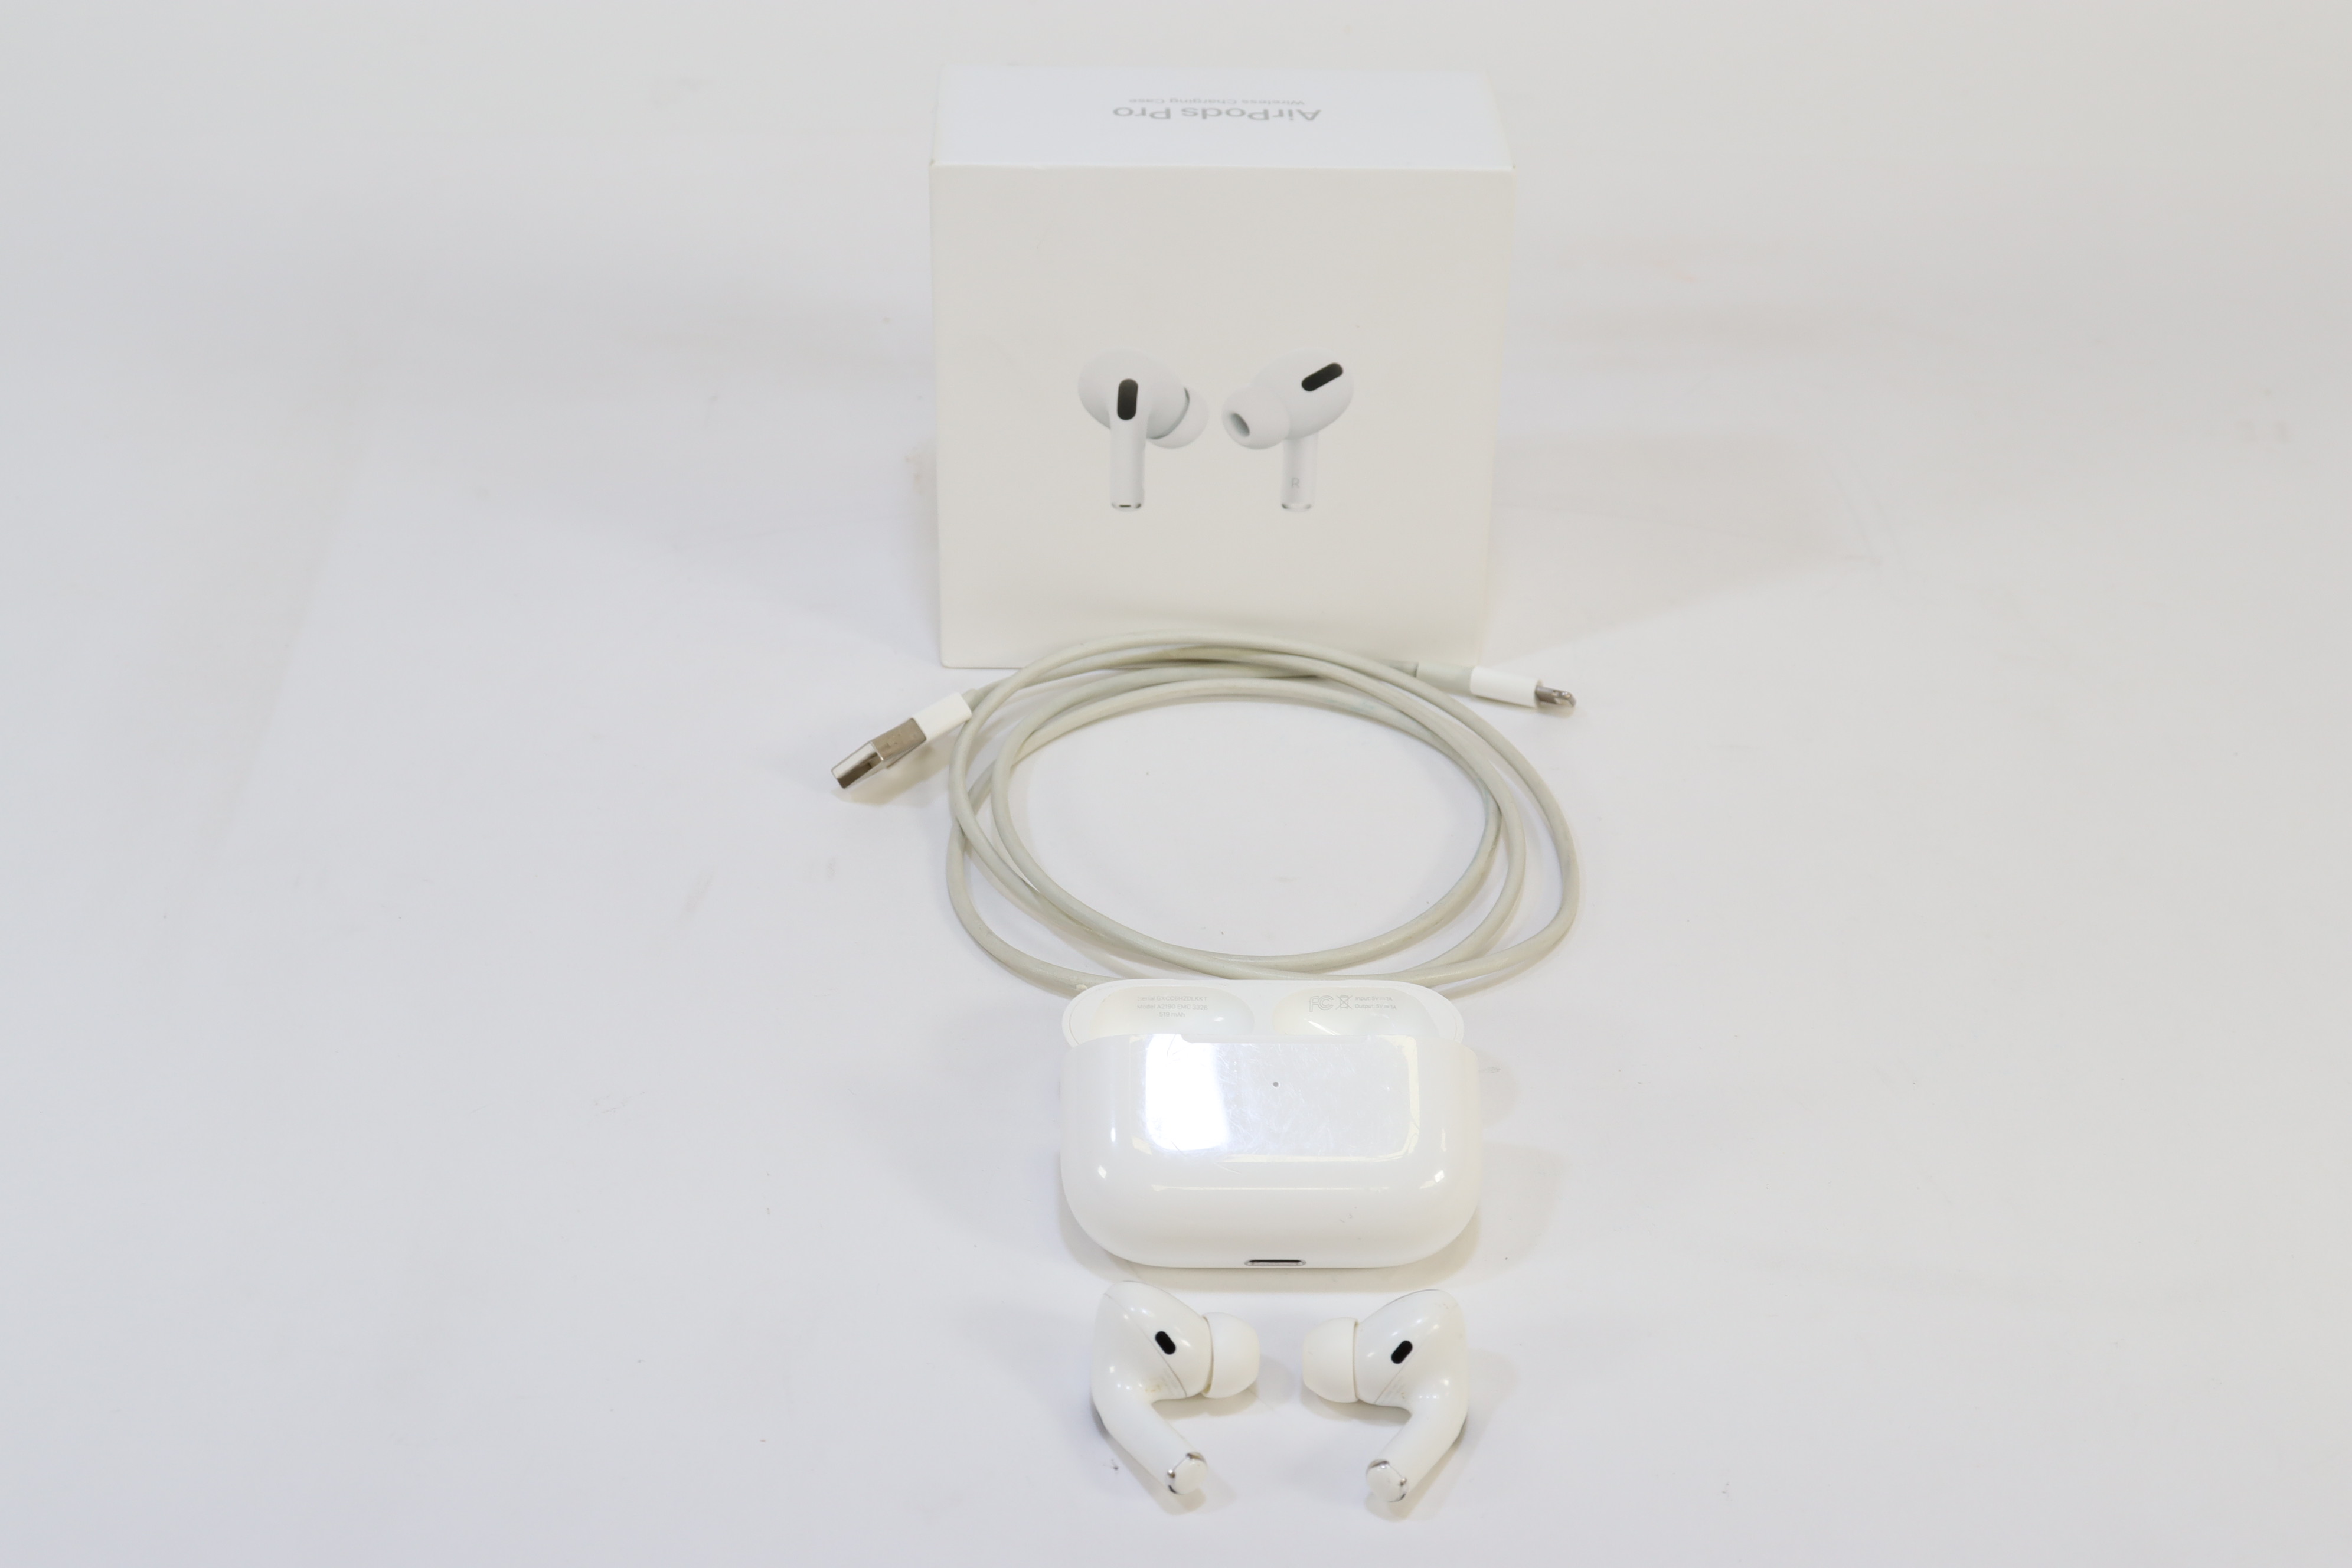 Restored Apple AirPods Pro Wireless In-Ear Headphones, MWP22AM/A - White  (Refurbished) 